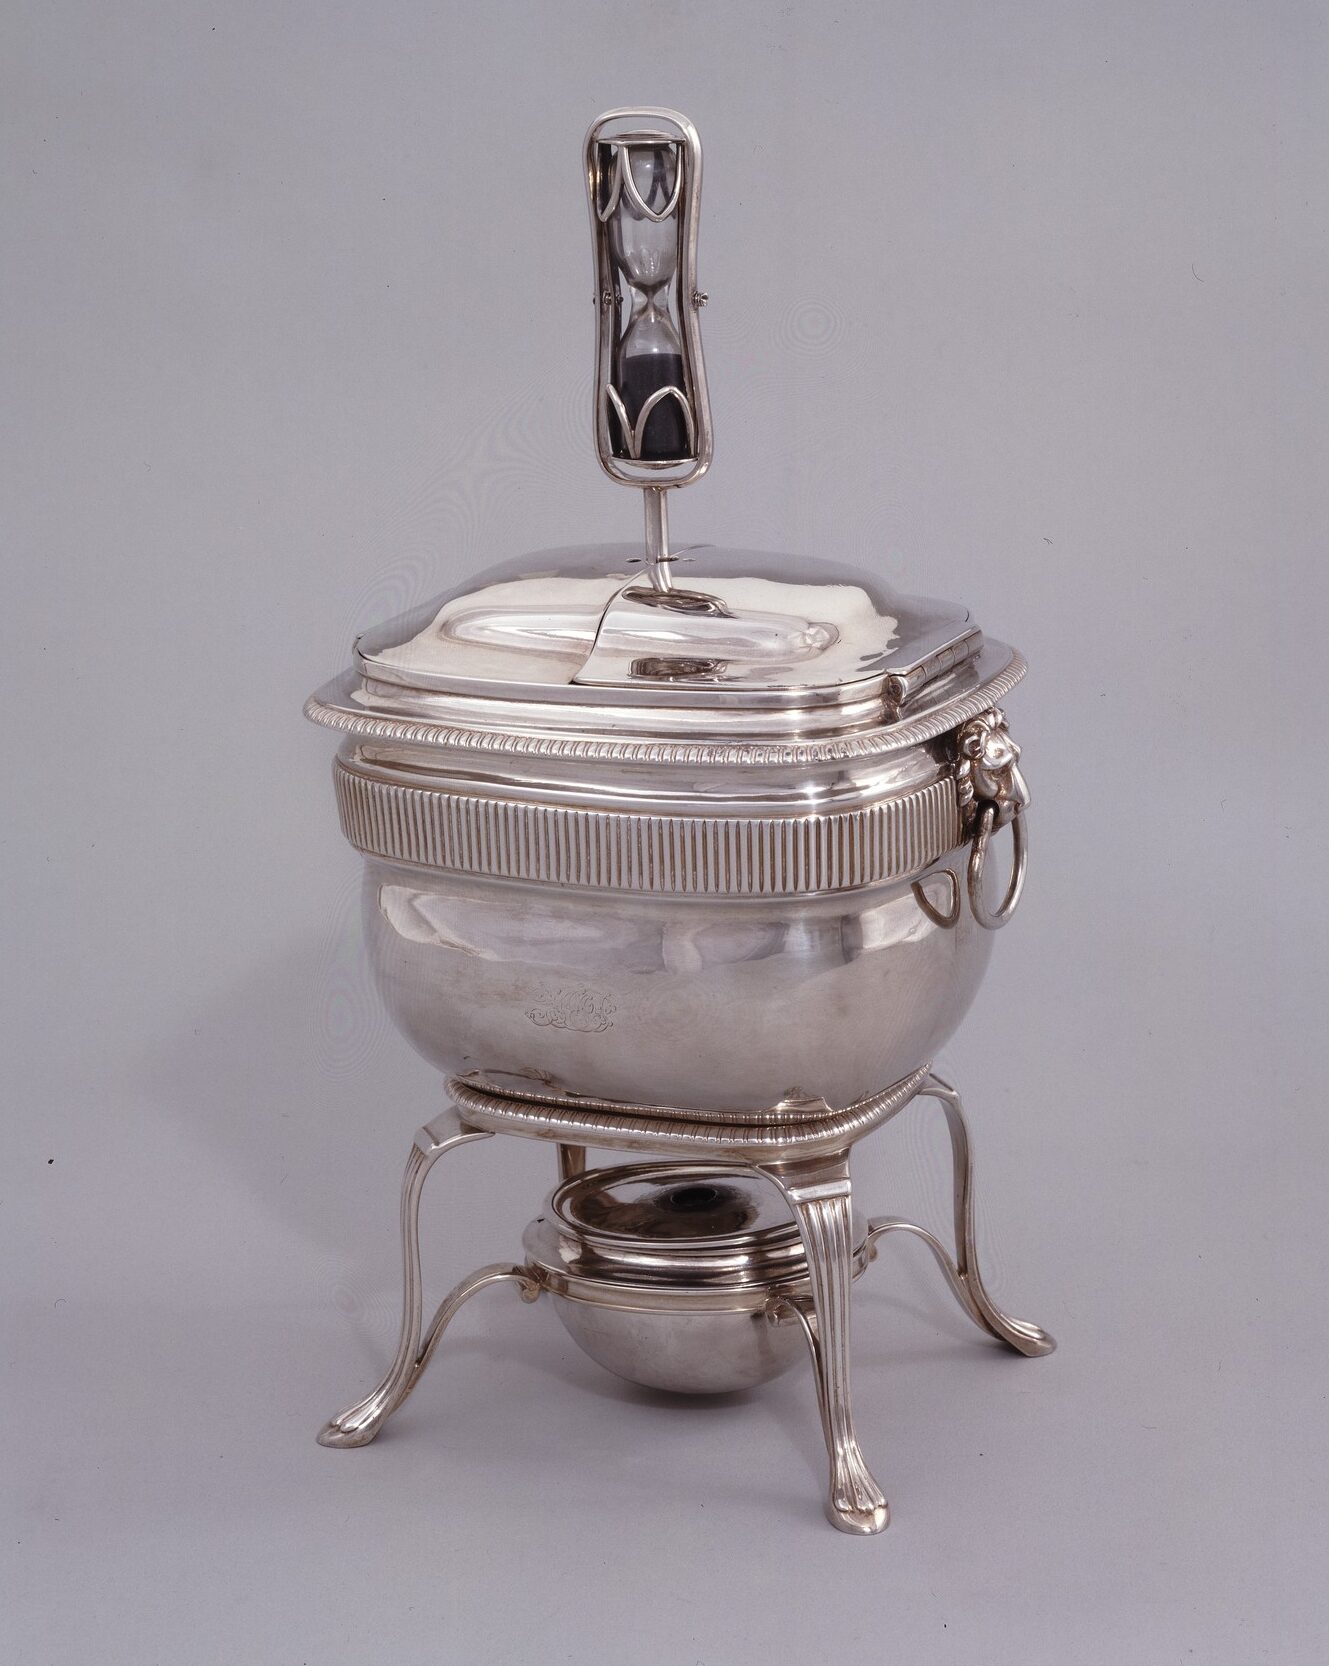 Square silver egg coddler sits on four thin legs connected to a circular burner below. A small hour-glass with black sand protrudes from the top of top.